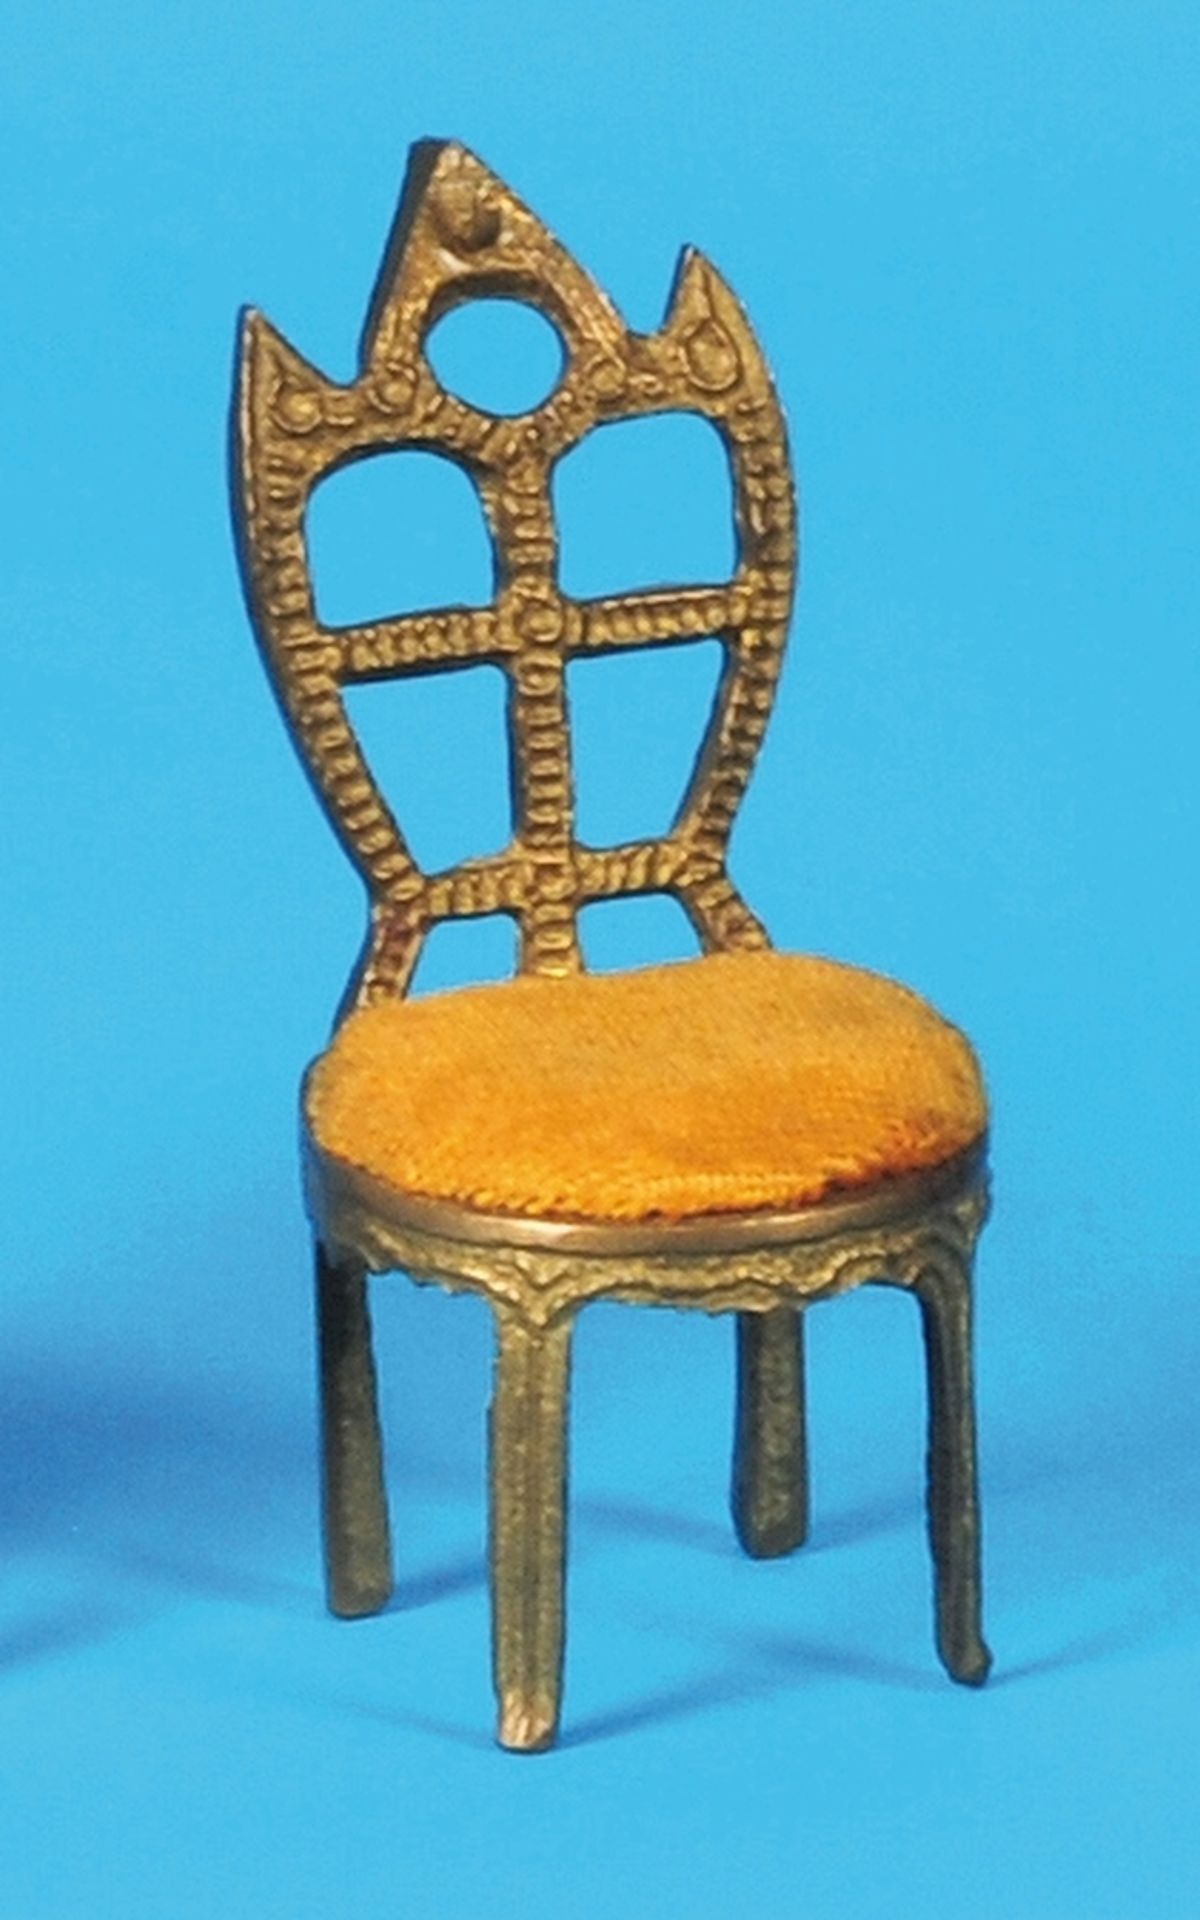 Small pocket watch stand in the shape of a chair, gilded structure with yellow velvet seating surfac